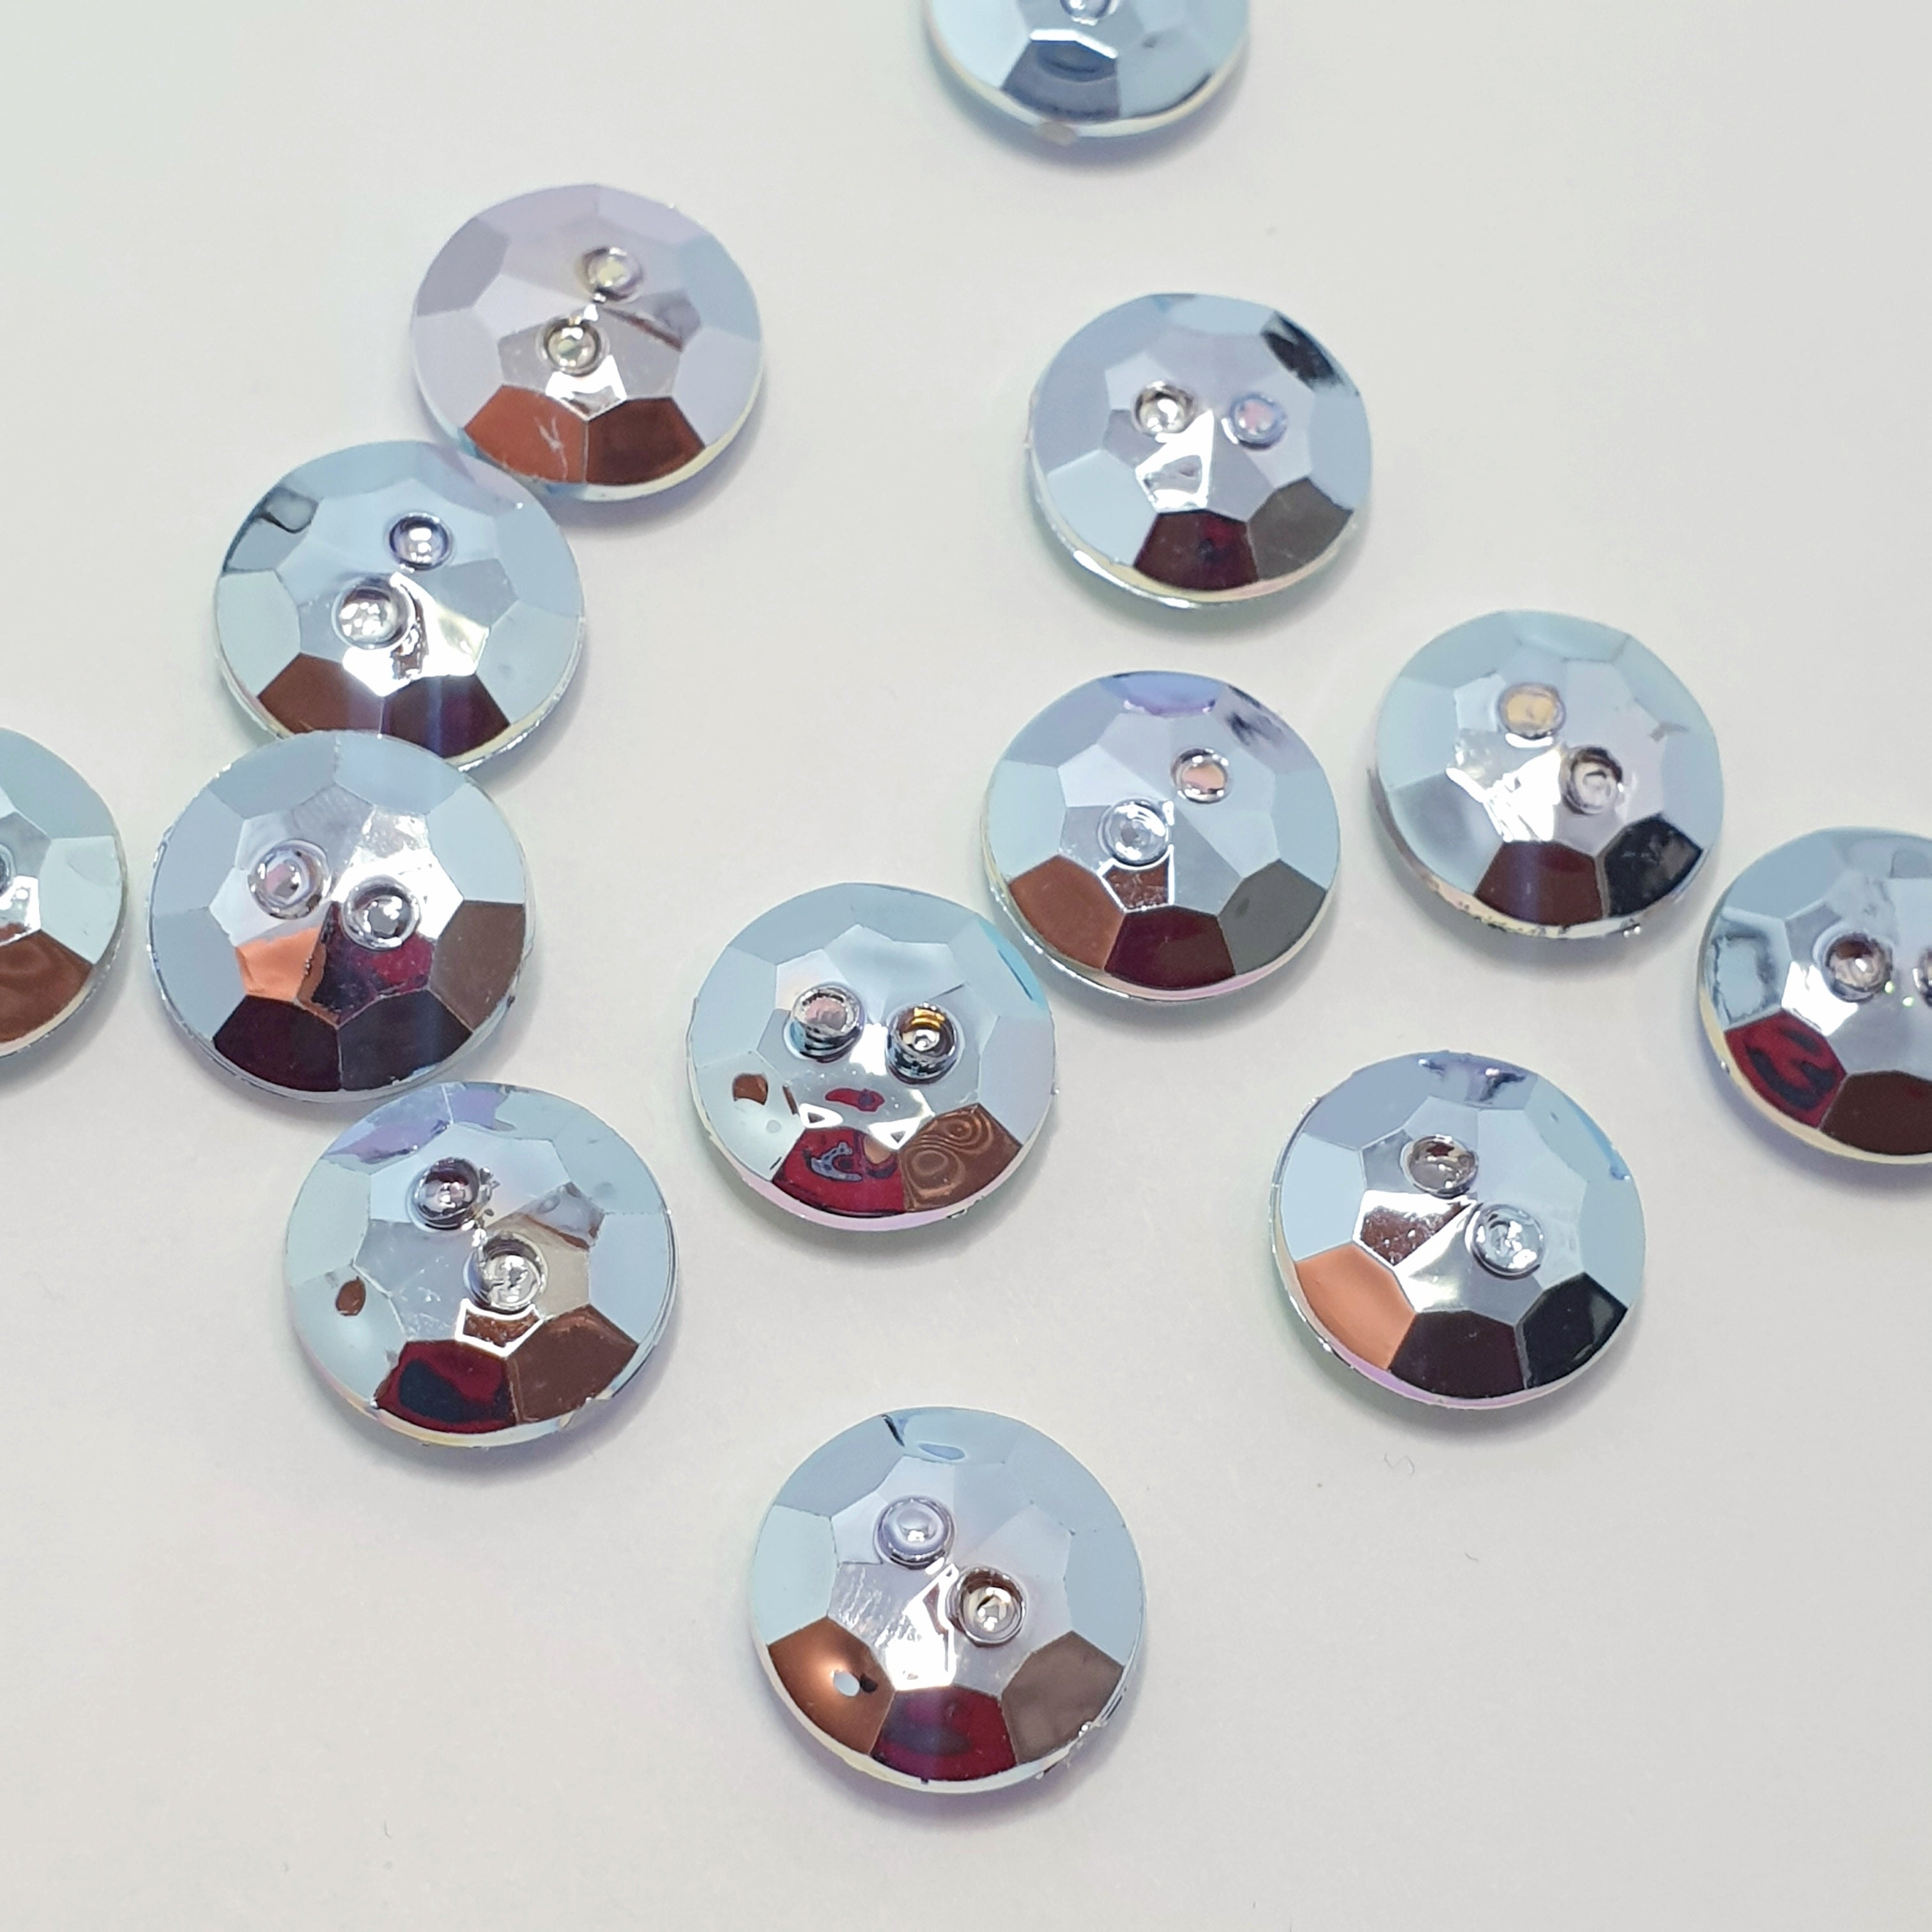 MajorCrafts 20pcs 13.5mm Crystal AB Faceted 2 Holes Round Acrylic Sewing Buttons